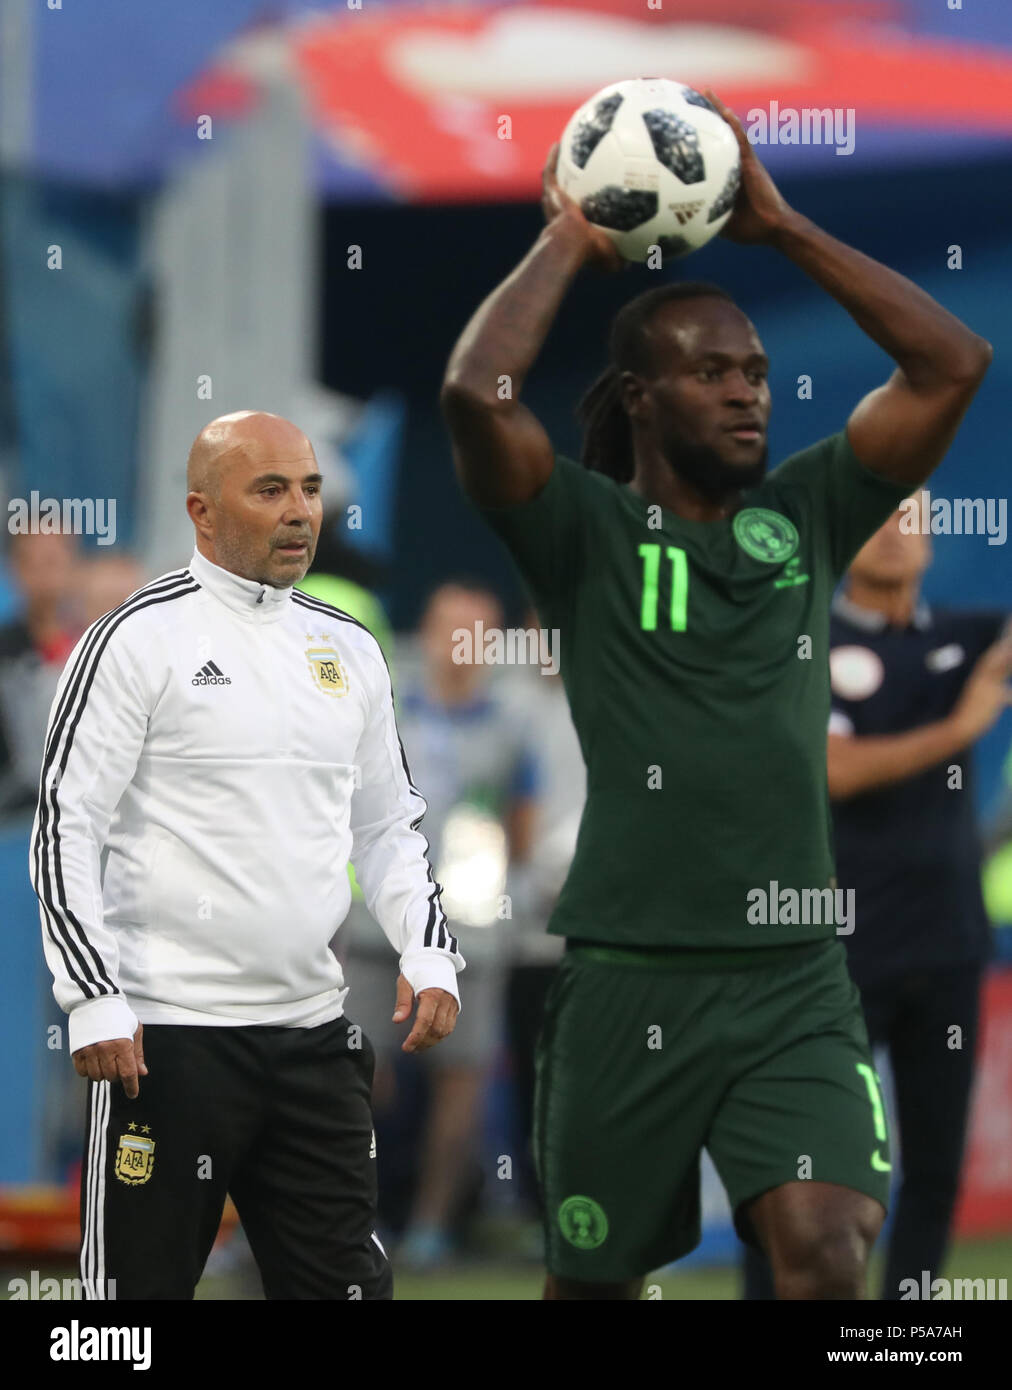 Moscow, Russia. 26th June, 2018. Soccer, World Cup 2018, Preliminary round, Group D, 3rd game day, Nigeria vs Argentina at the St. Petersburg Stadium: Argentina's Jorge Sampaoli (L) and Nigeria's Victor Moses on the sidelines. Credit: Cezaro De Luca/dpa/Alamy Live News Stock Photo